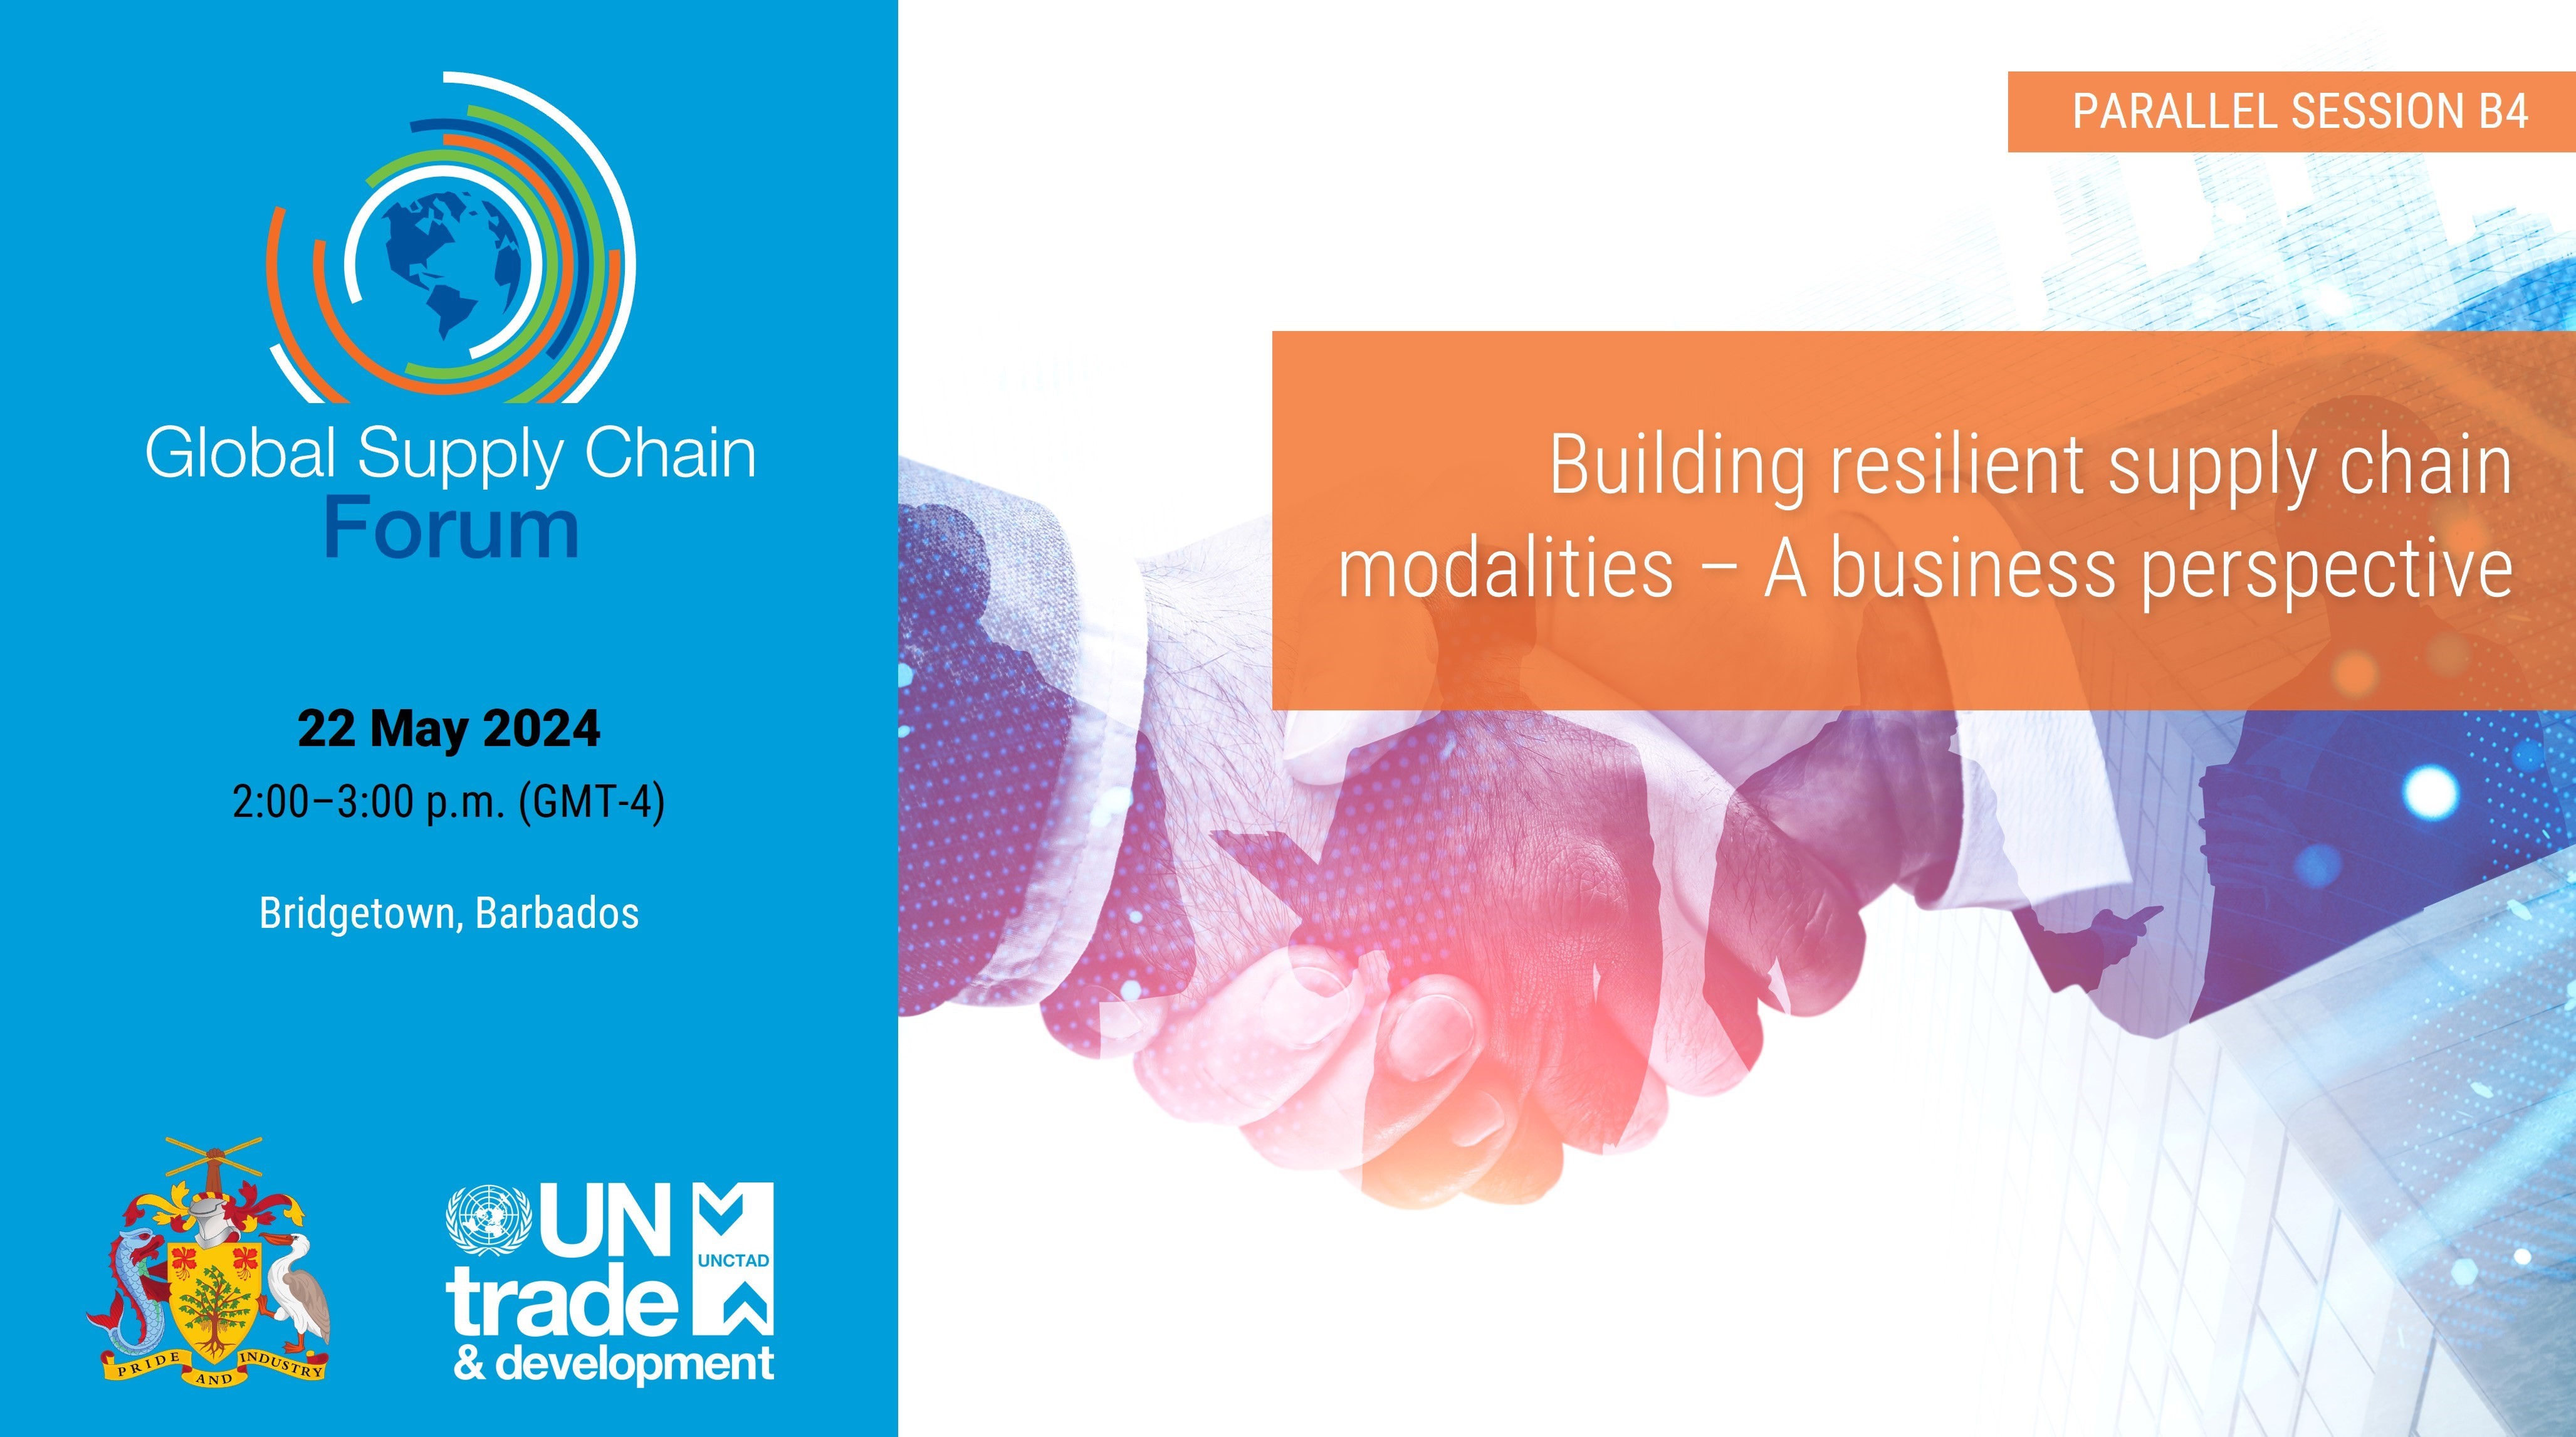 Building resilient supply chain modalities - A business perspective